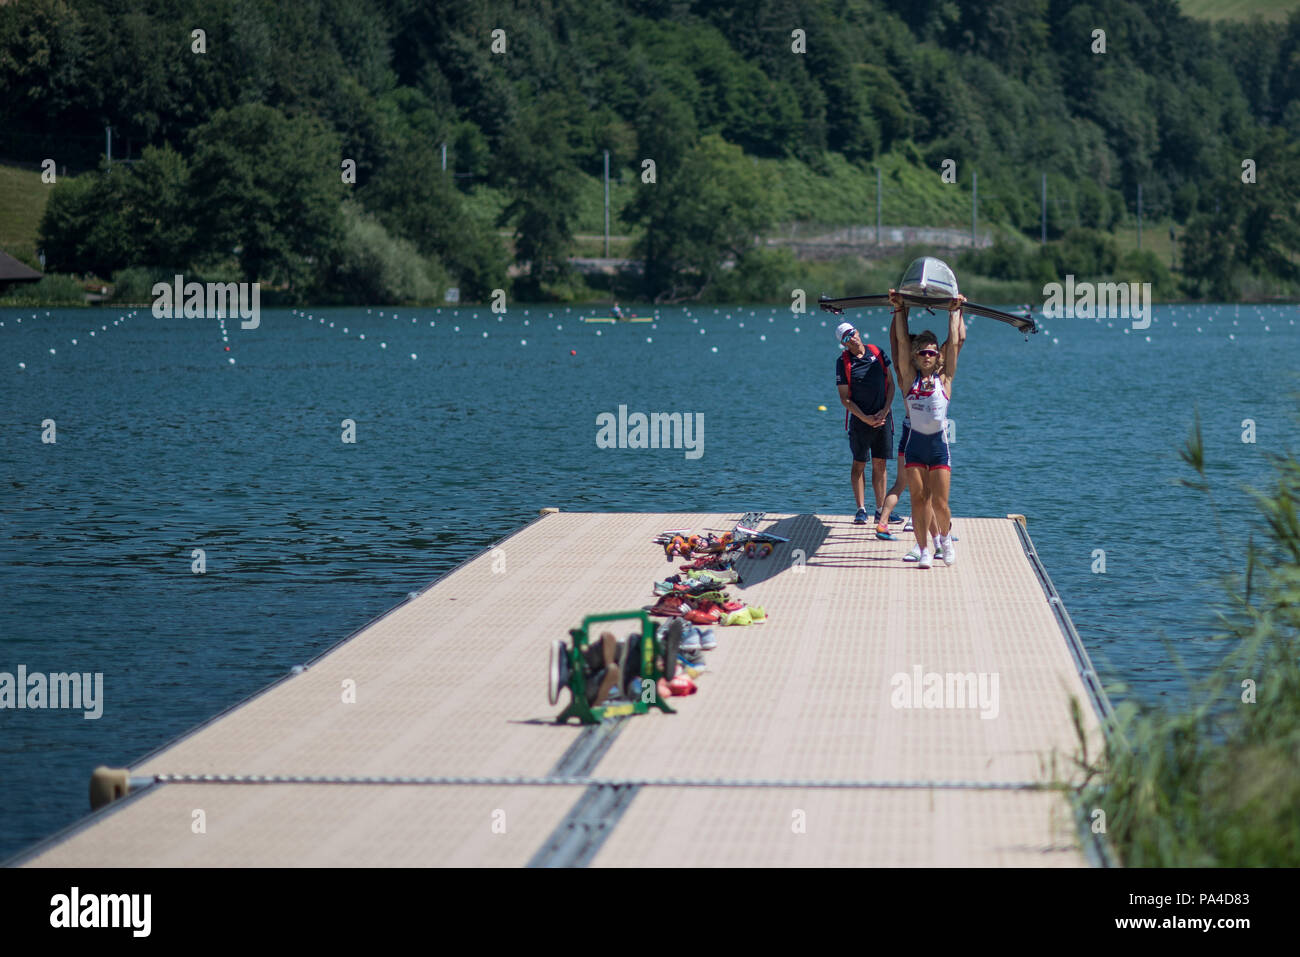 Lucerne, SWITZERLAND, 12th July 2018, Thursday, GBR LW4X Bow,  Madeleine ARLETT,  Elisha LEWIS, Gemma HALL, Francesca RAWLINS and coach, Darren WHITER,  The crew carry their boat from the pontoon after a training session, FISA World Cup III, Lake Rotsee, © Peter SPURRIER, Stock Photo